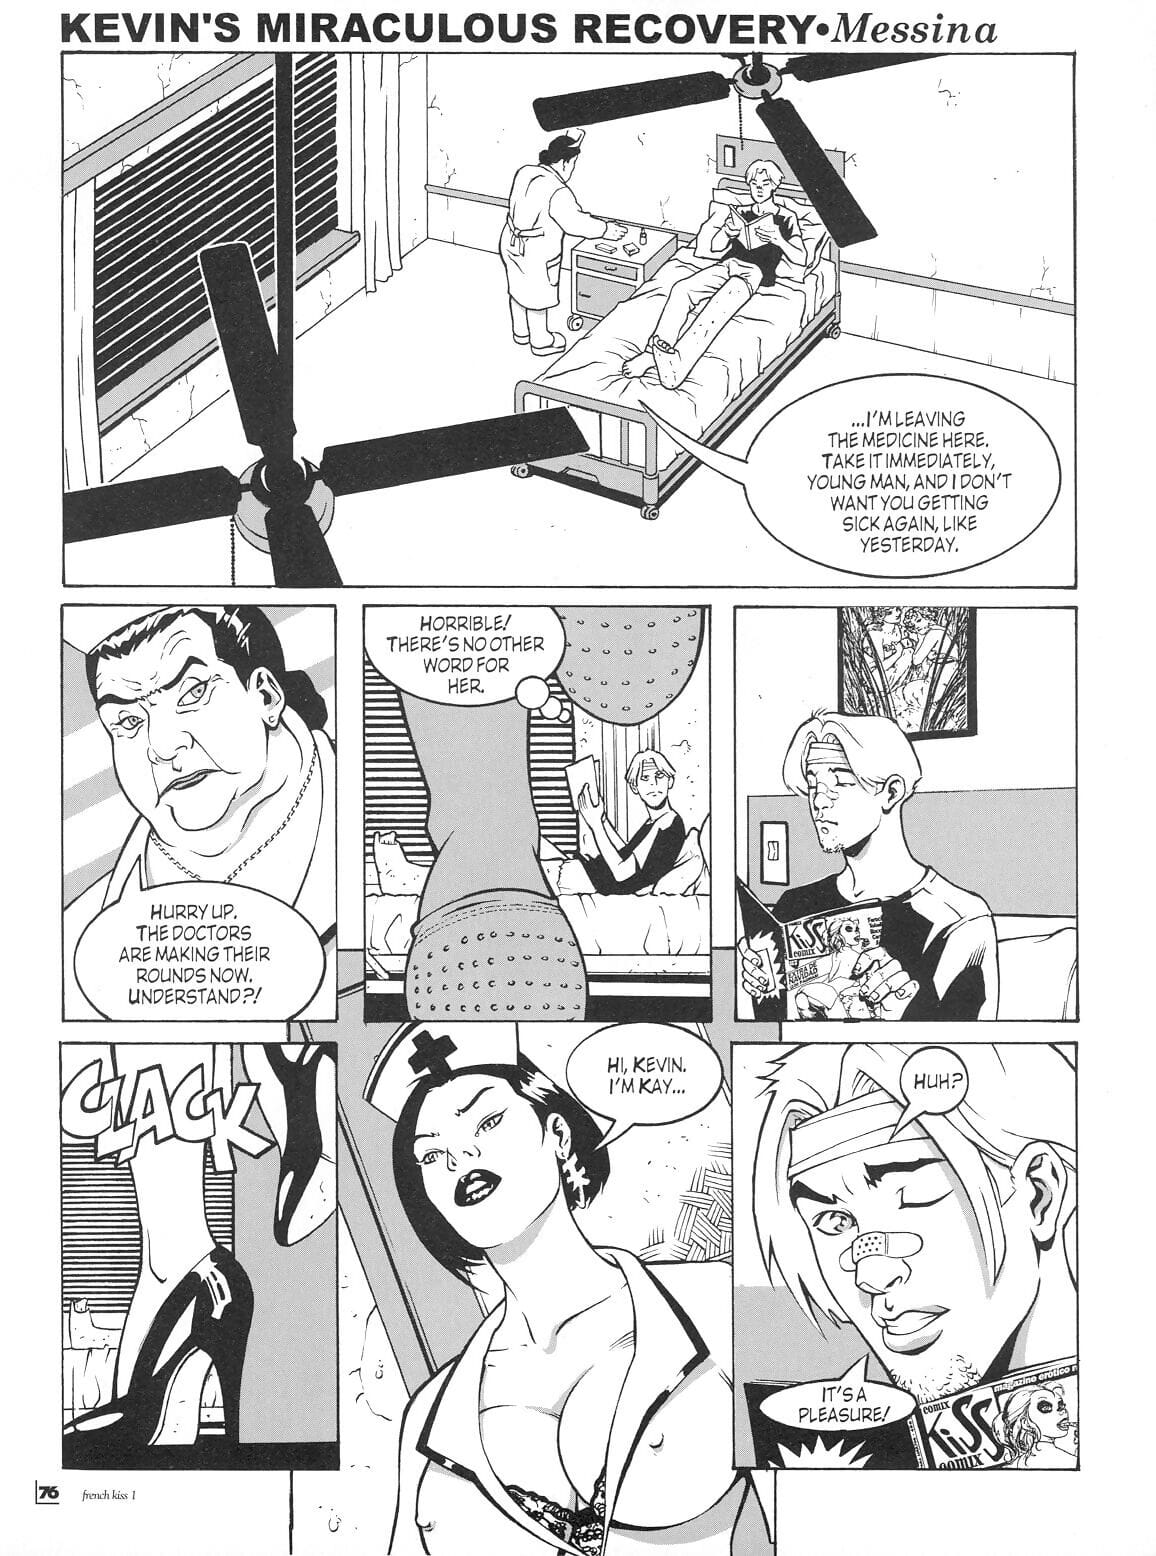 French Kiss 1 - part 2 page 1